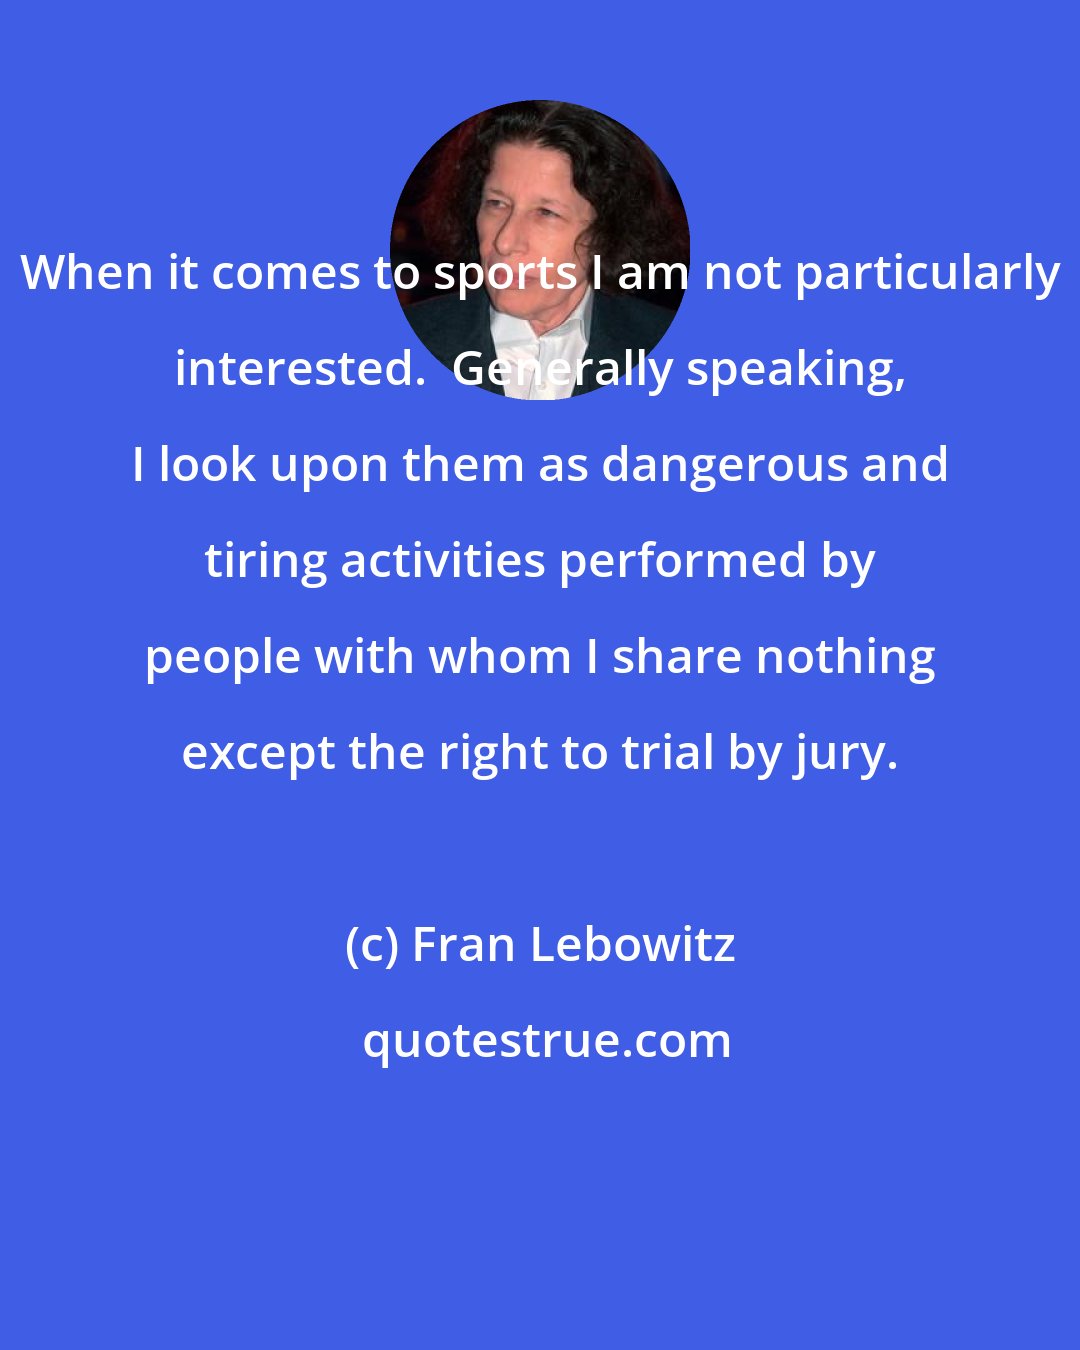 Fran Lebowitz: When it comes to sports I am not particularly interested.  Generally speaking, I look upon them as dangerous and tiring activities performed by people with whom I share nothing except the right to trial by jury.